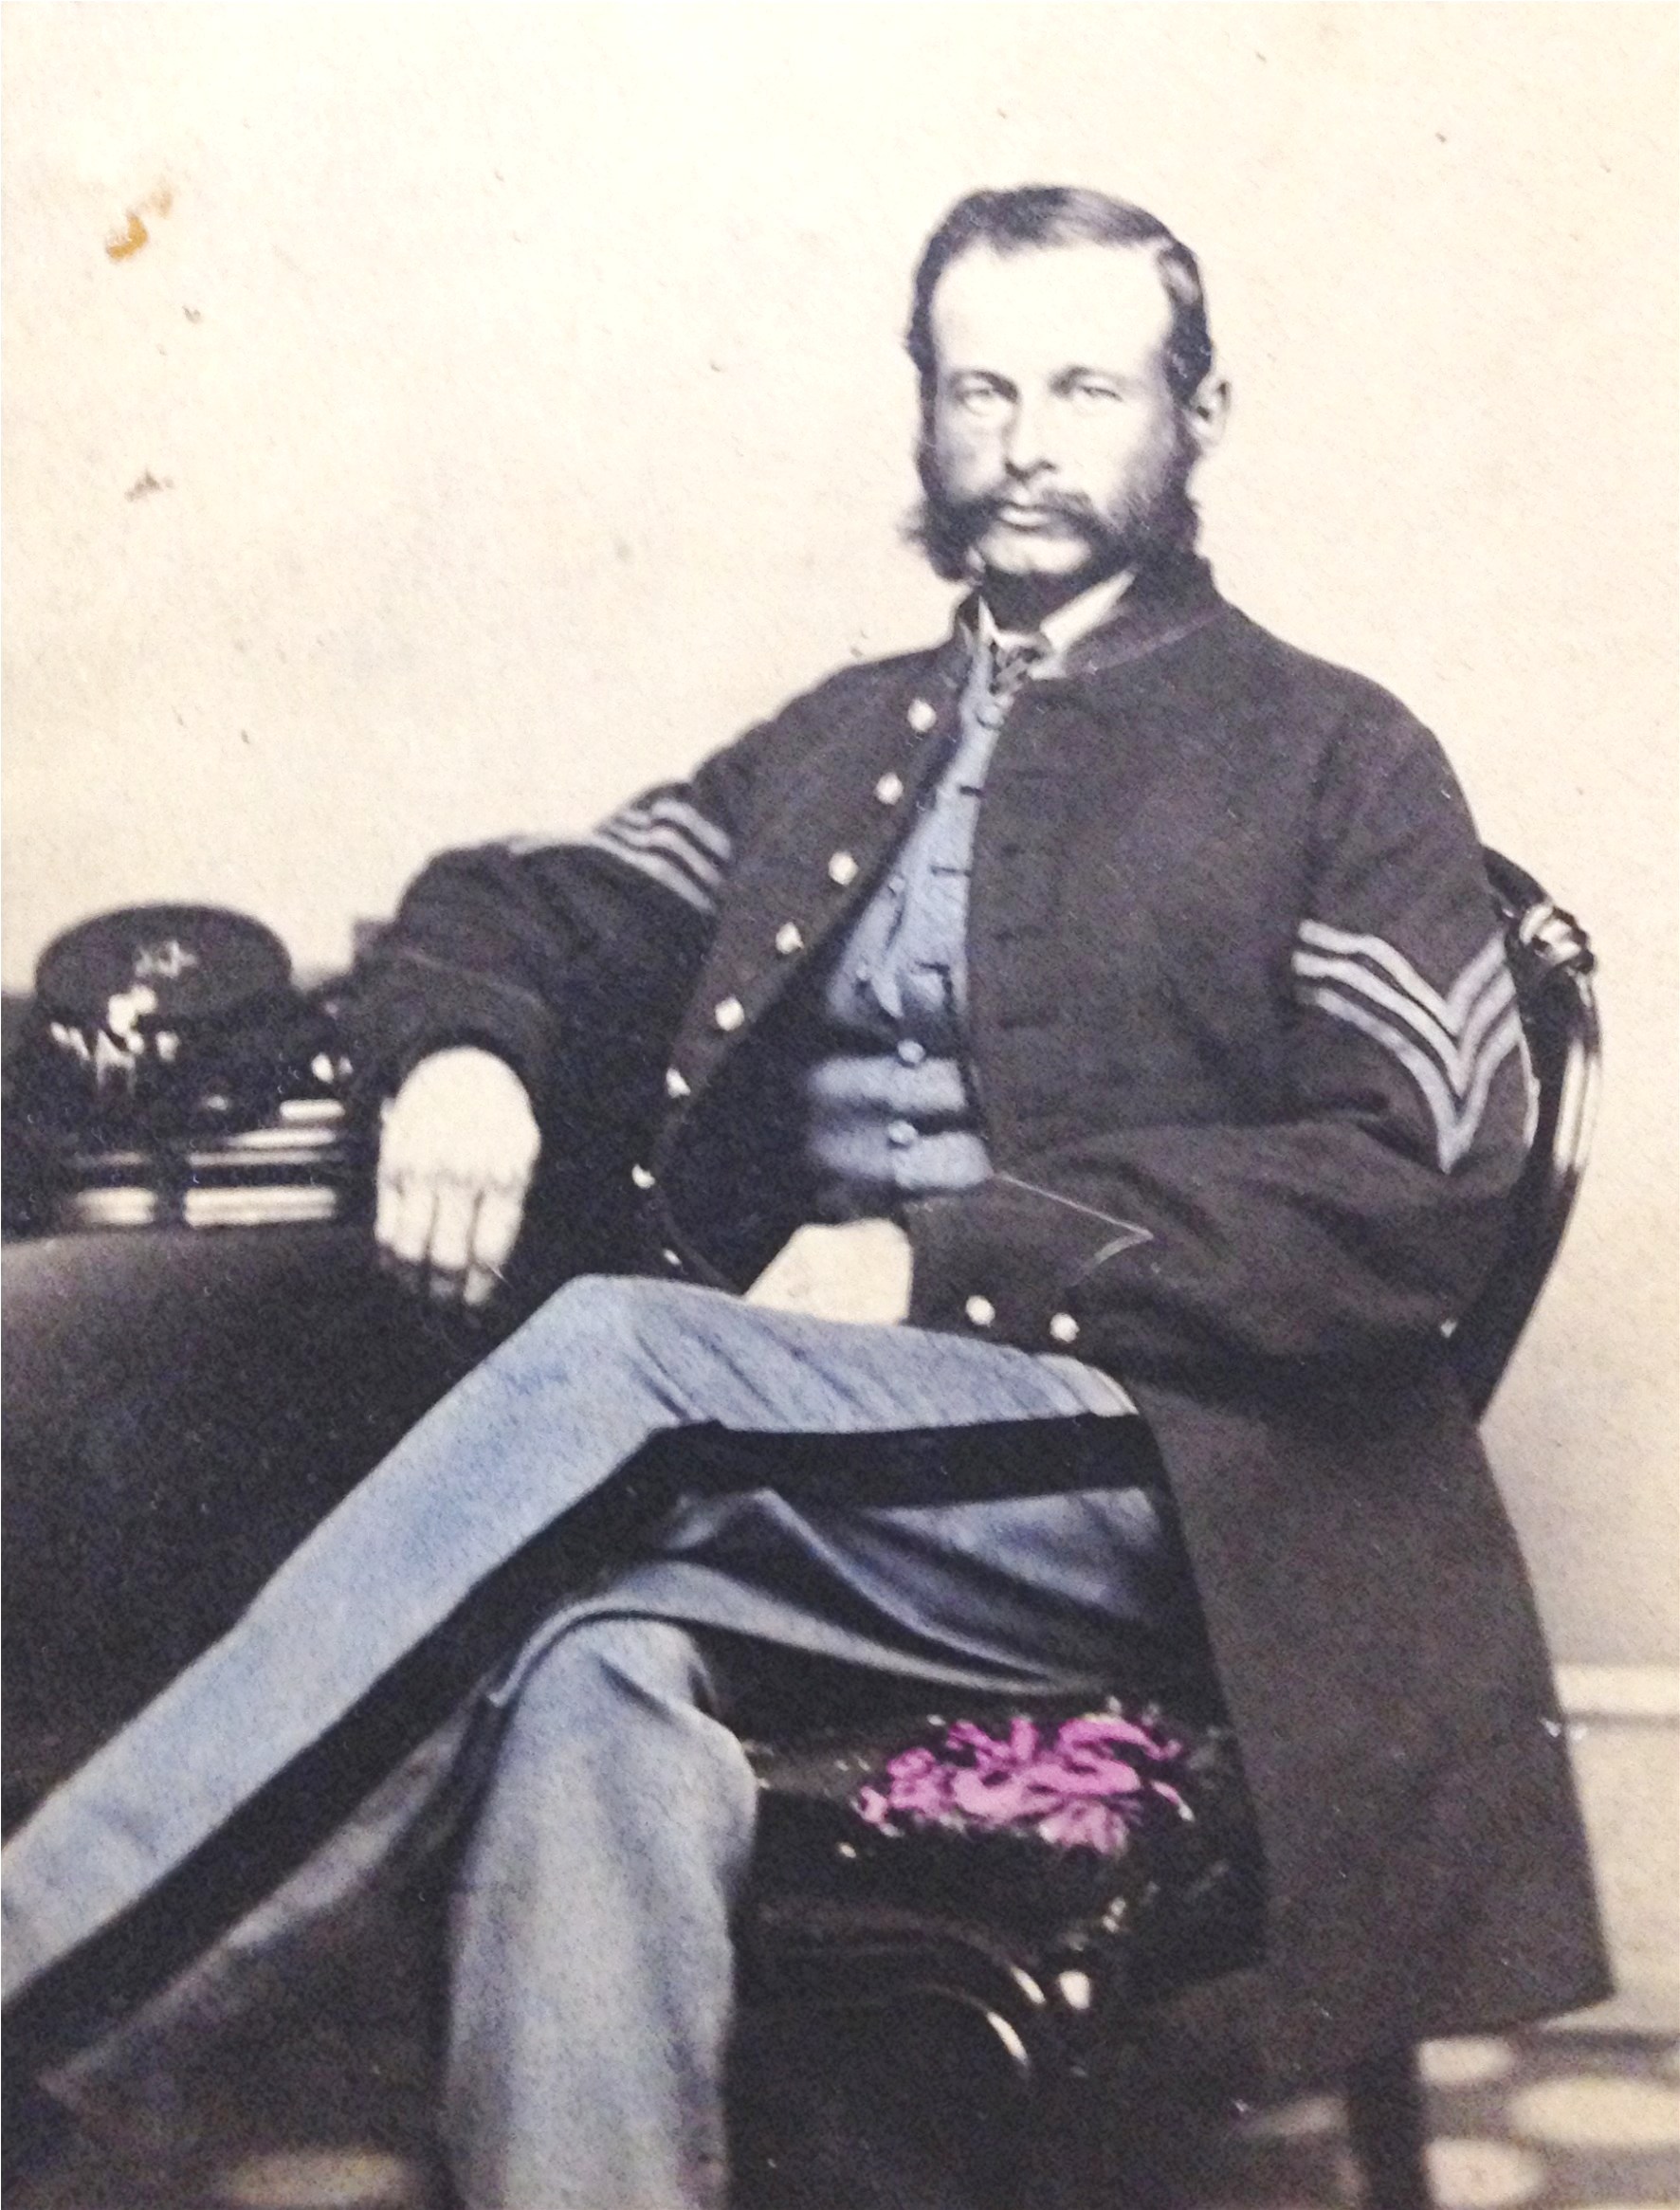 Image of Sgt.John Emerson Anderson